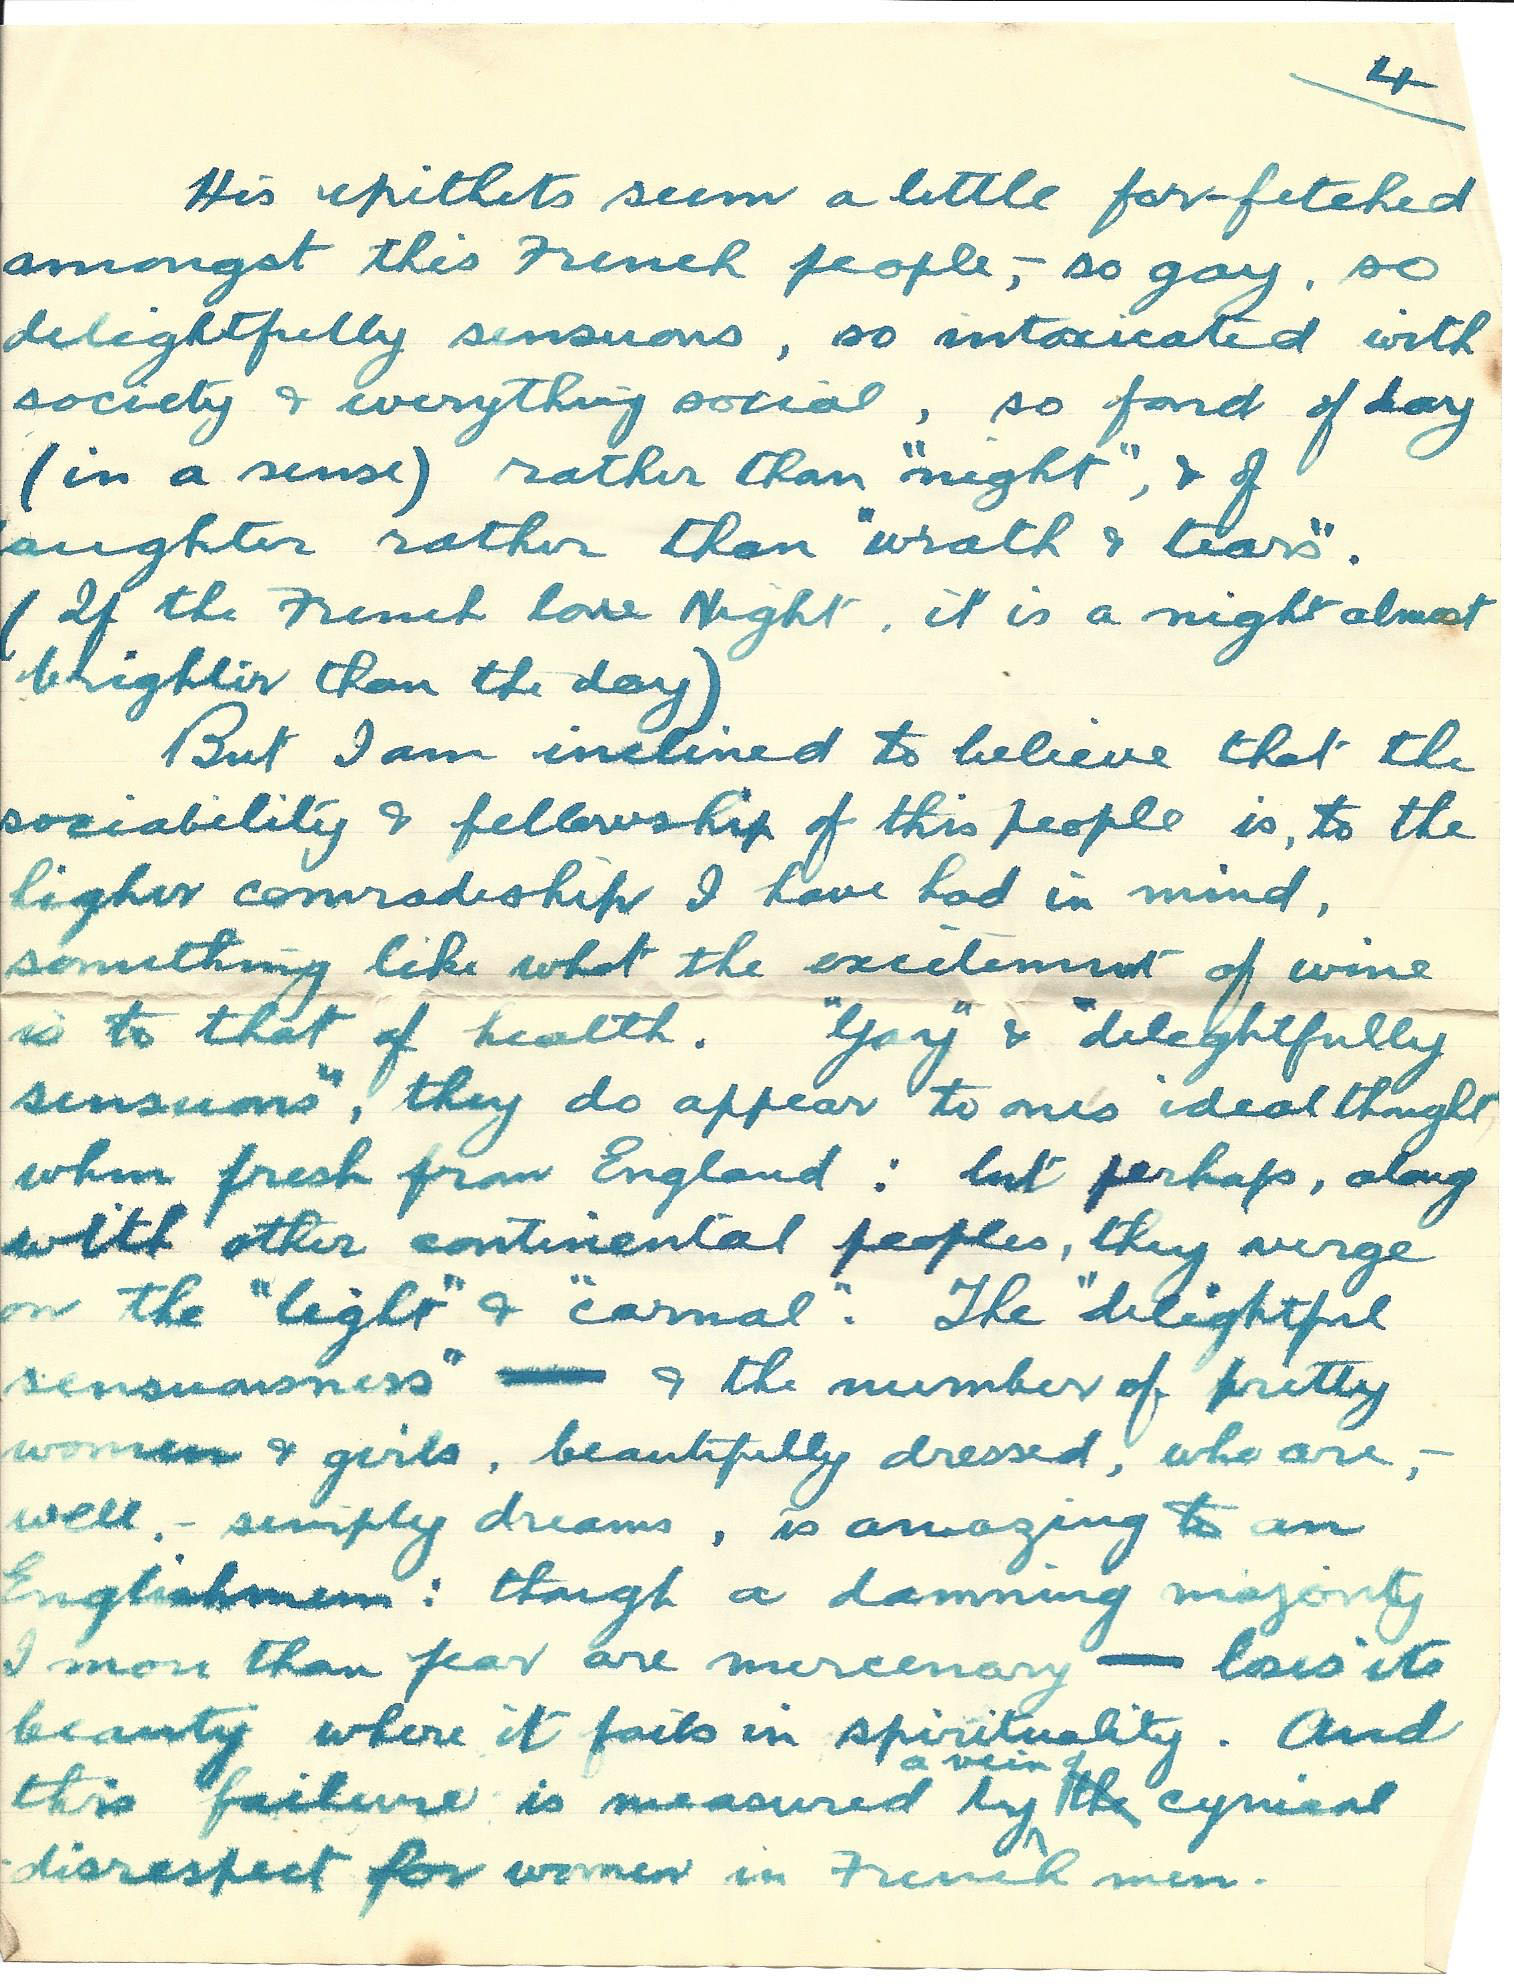 1919-08-19 p4 Donald Bearman letter to his father